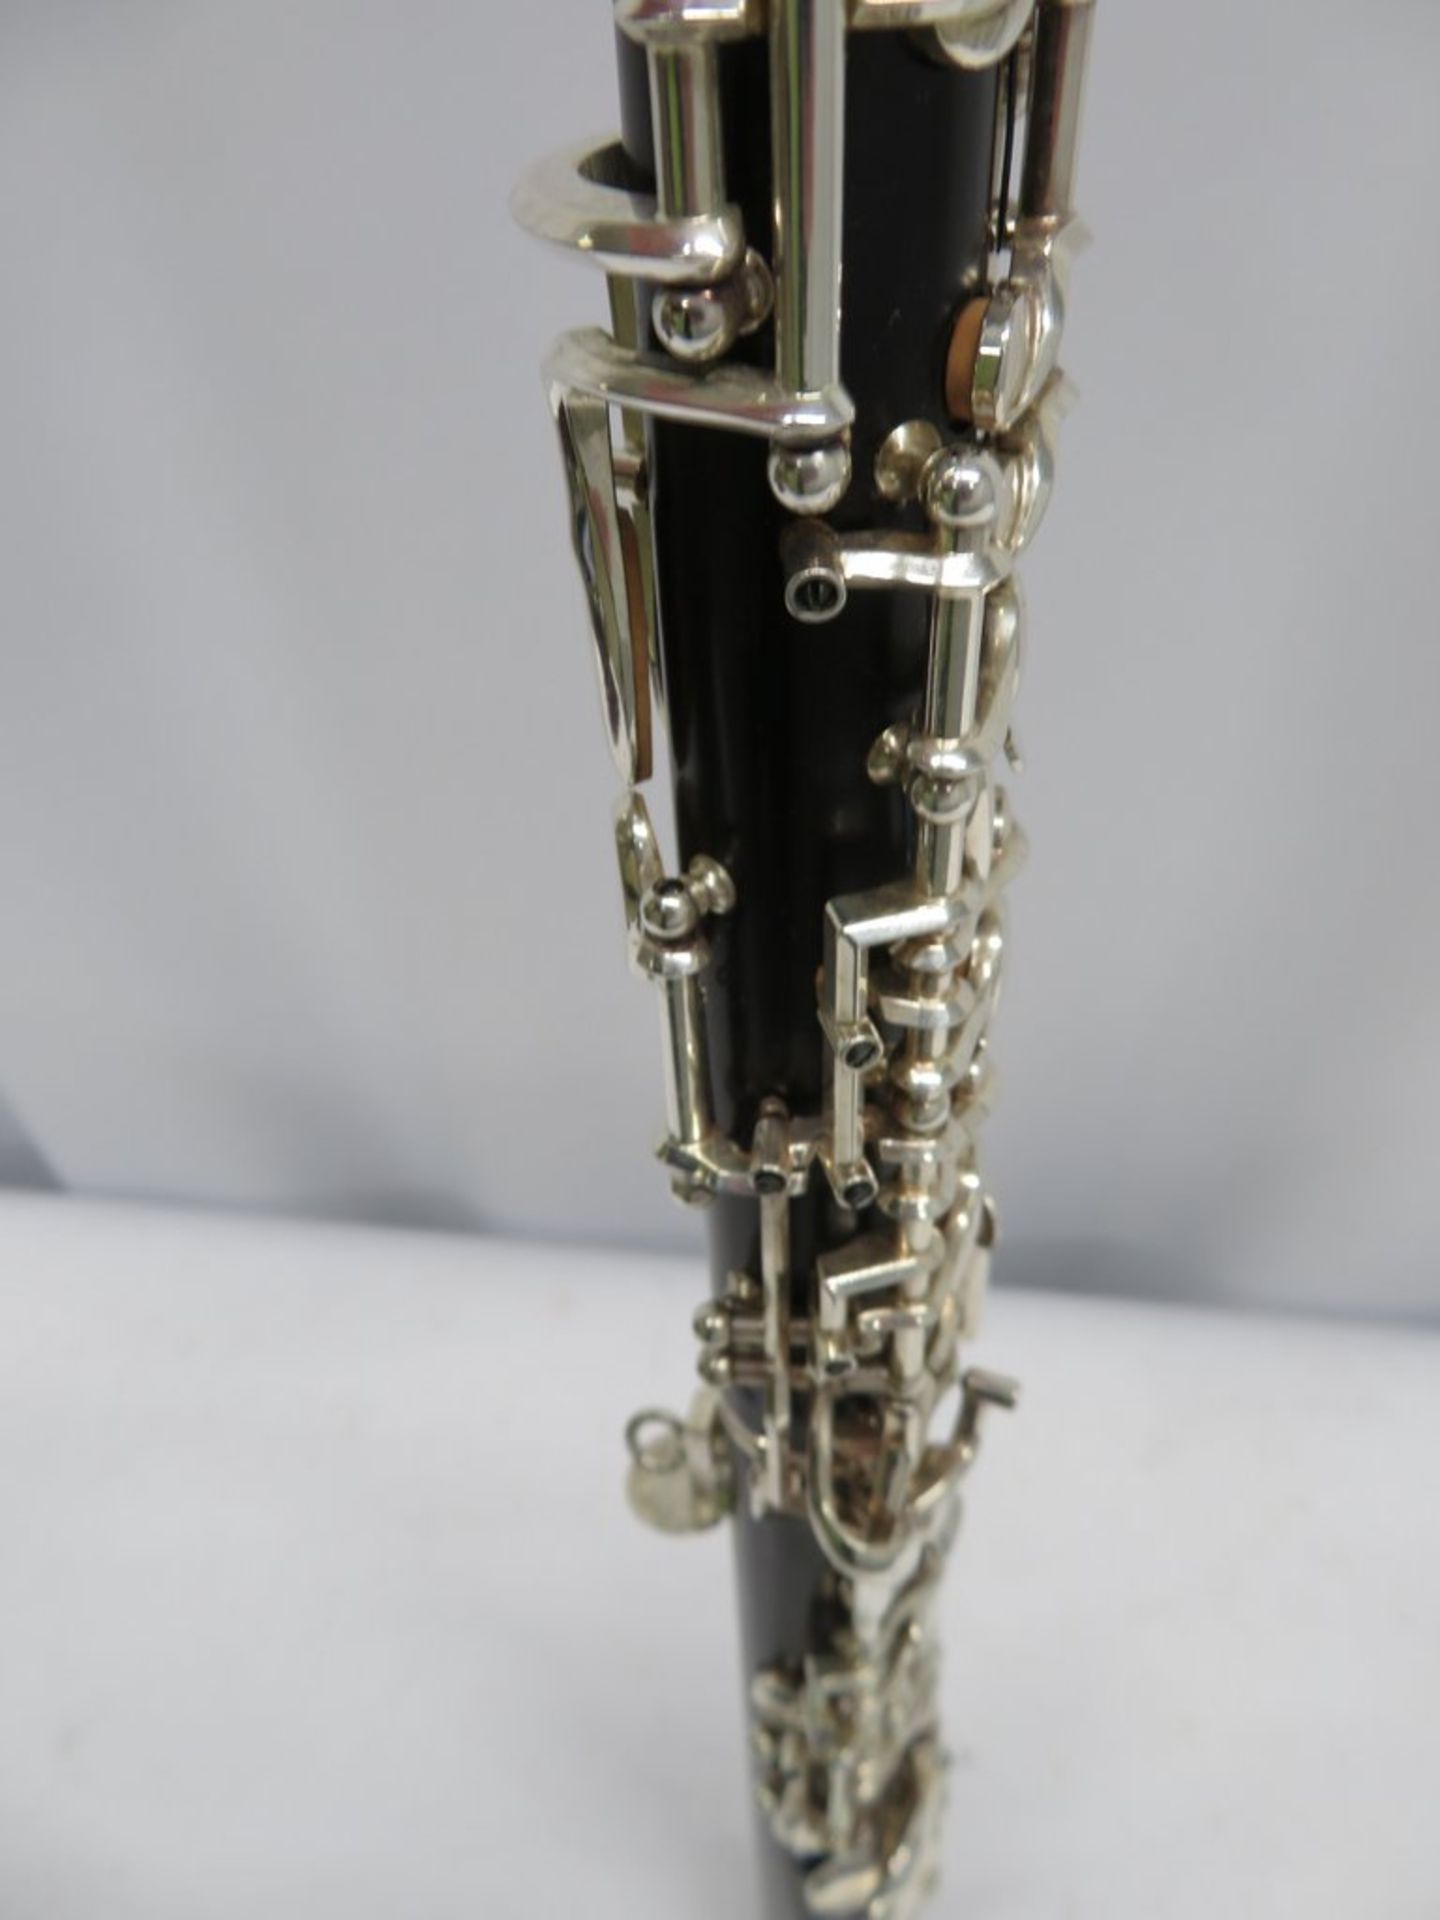 Buffet Green Line BC Oboe With Case. Serial Number: G11814. Please Note That This Item Has - Image 13 of 15